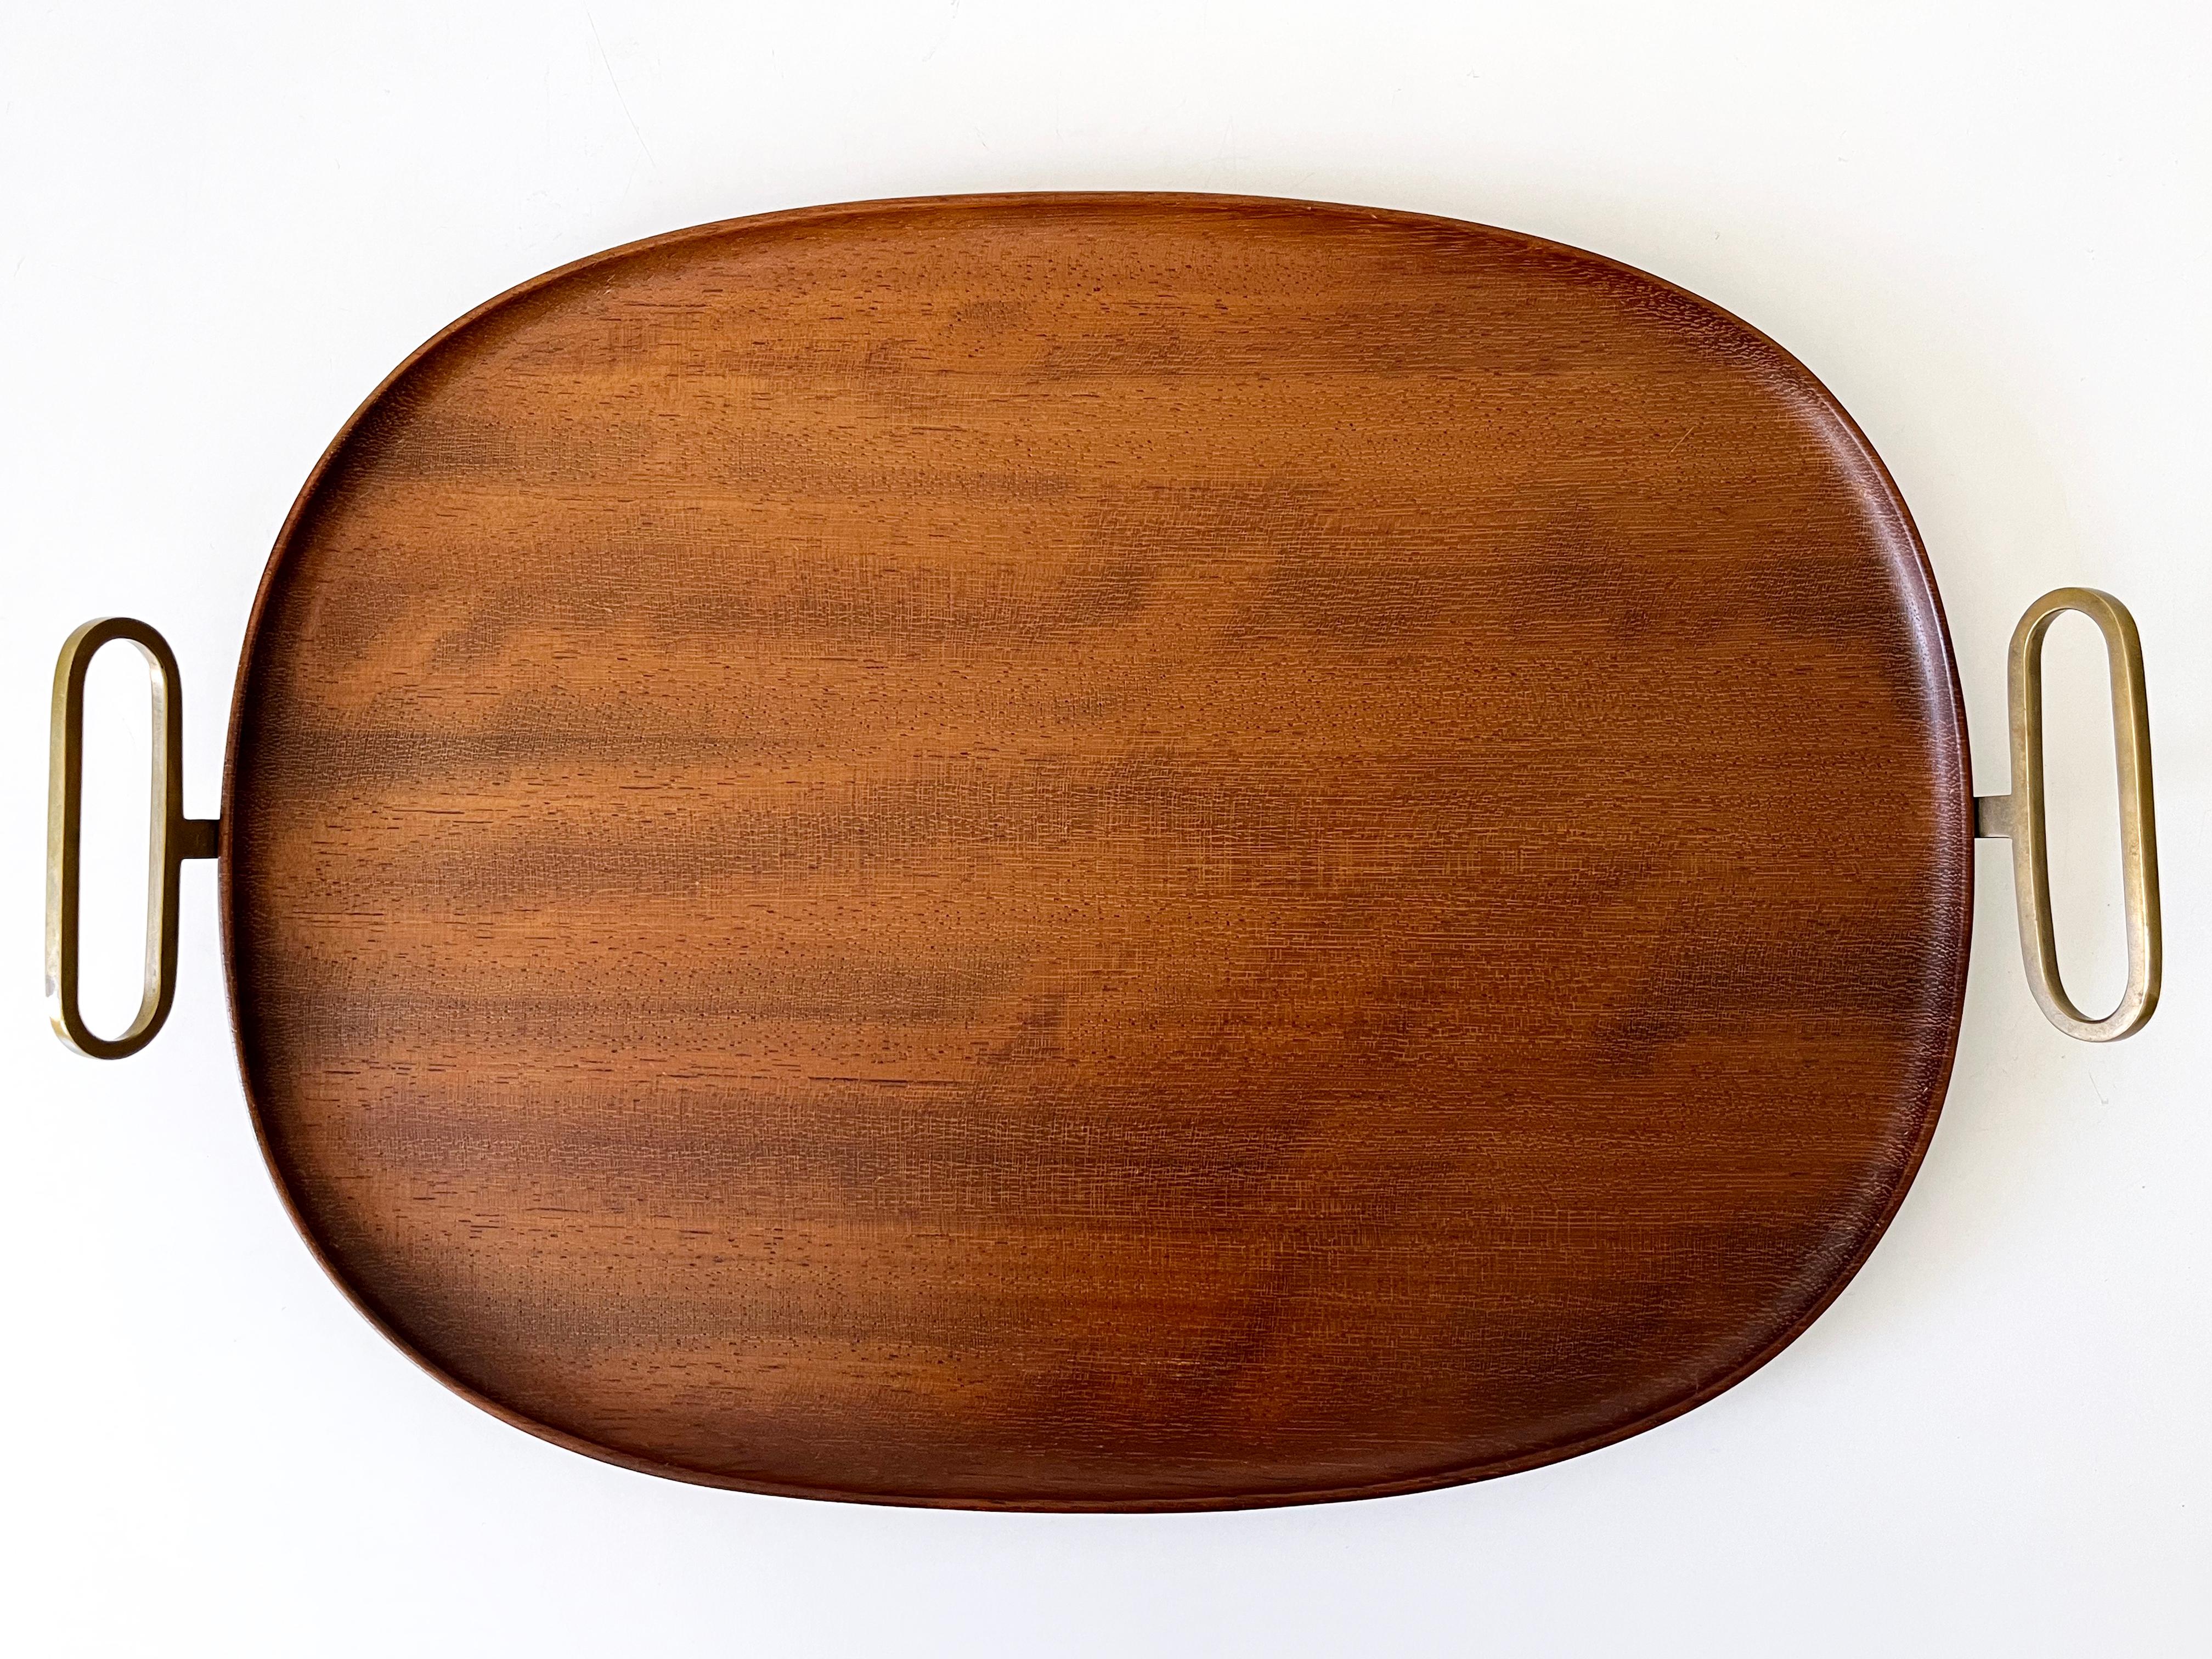 Extremely Rare Mid-Century Modern Teak Serving Tray by Carl Auböck Austria 1950s For Sale 10